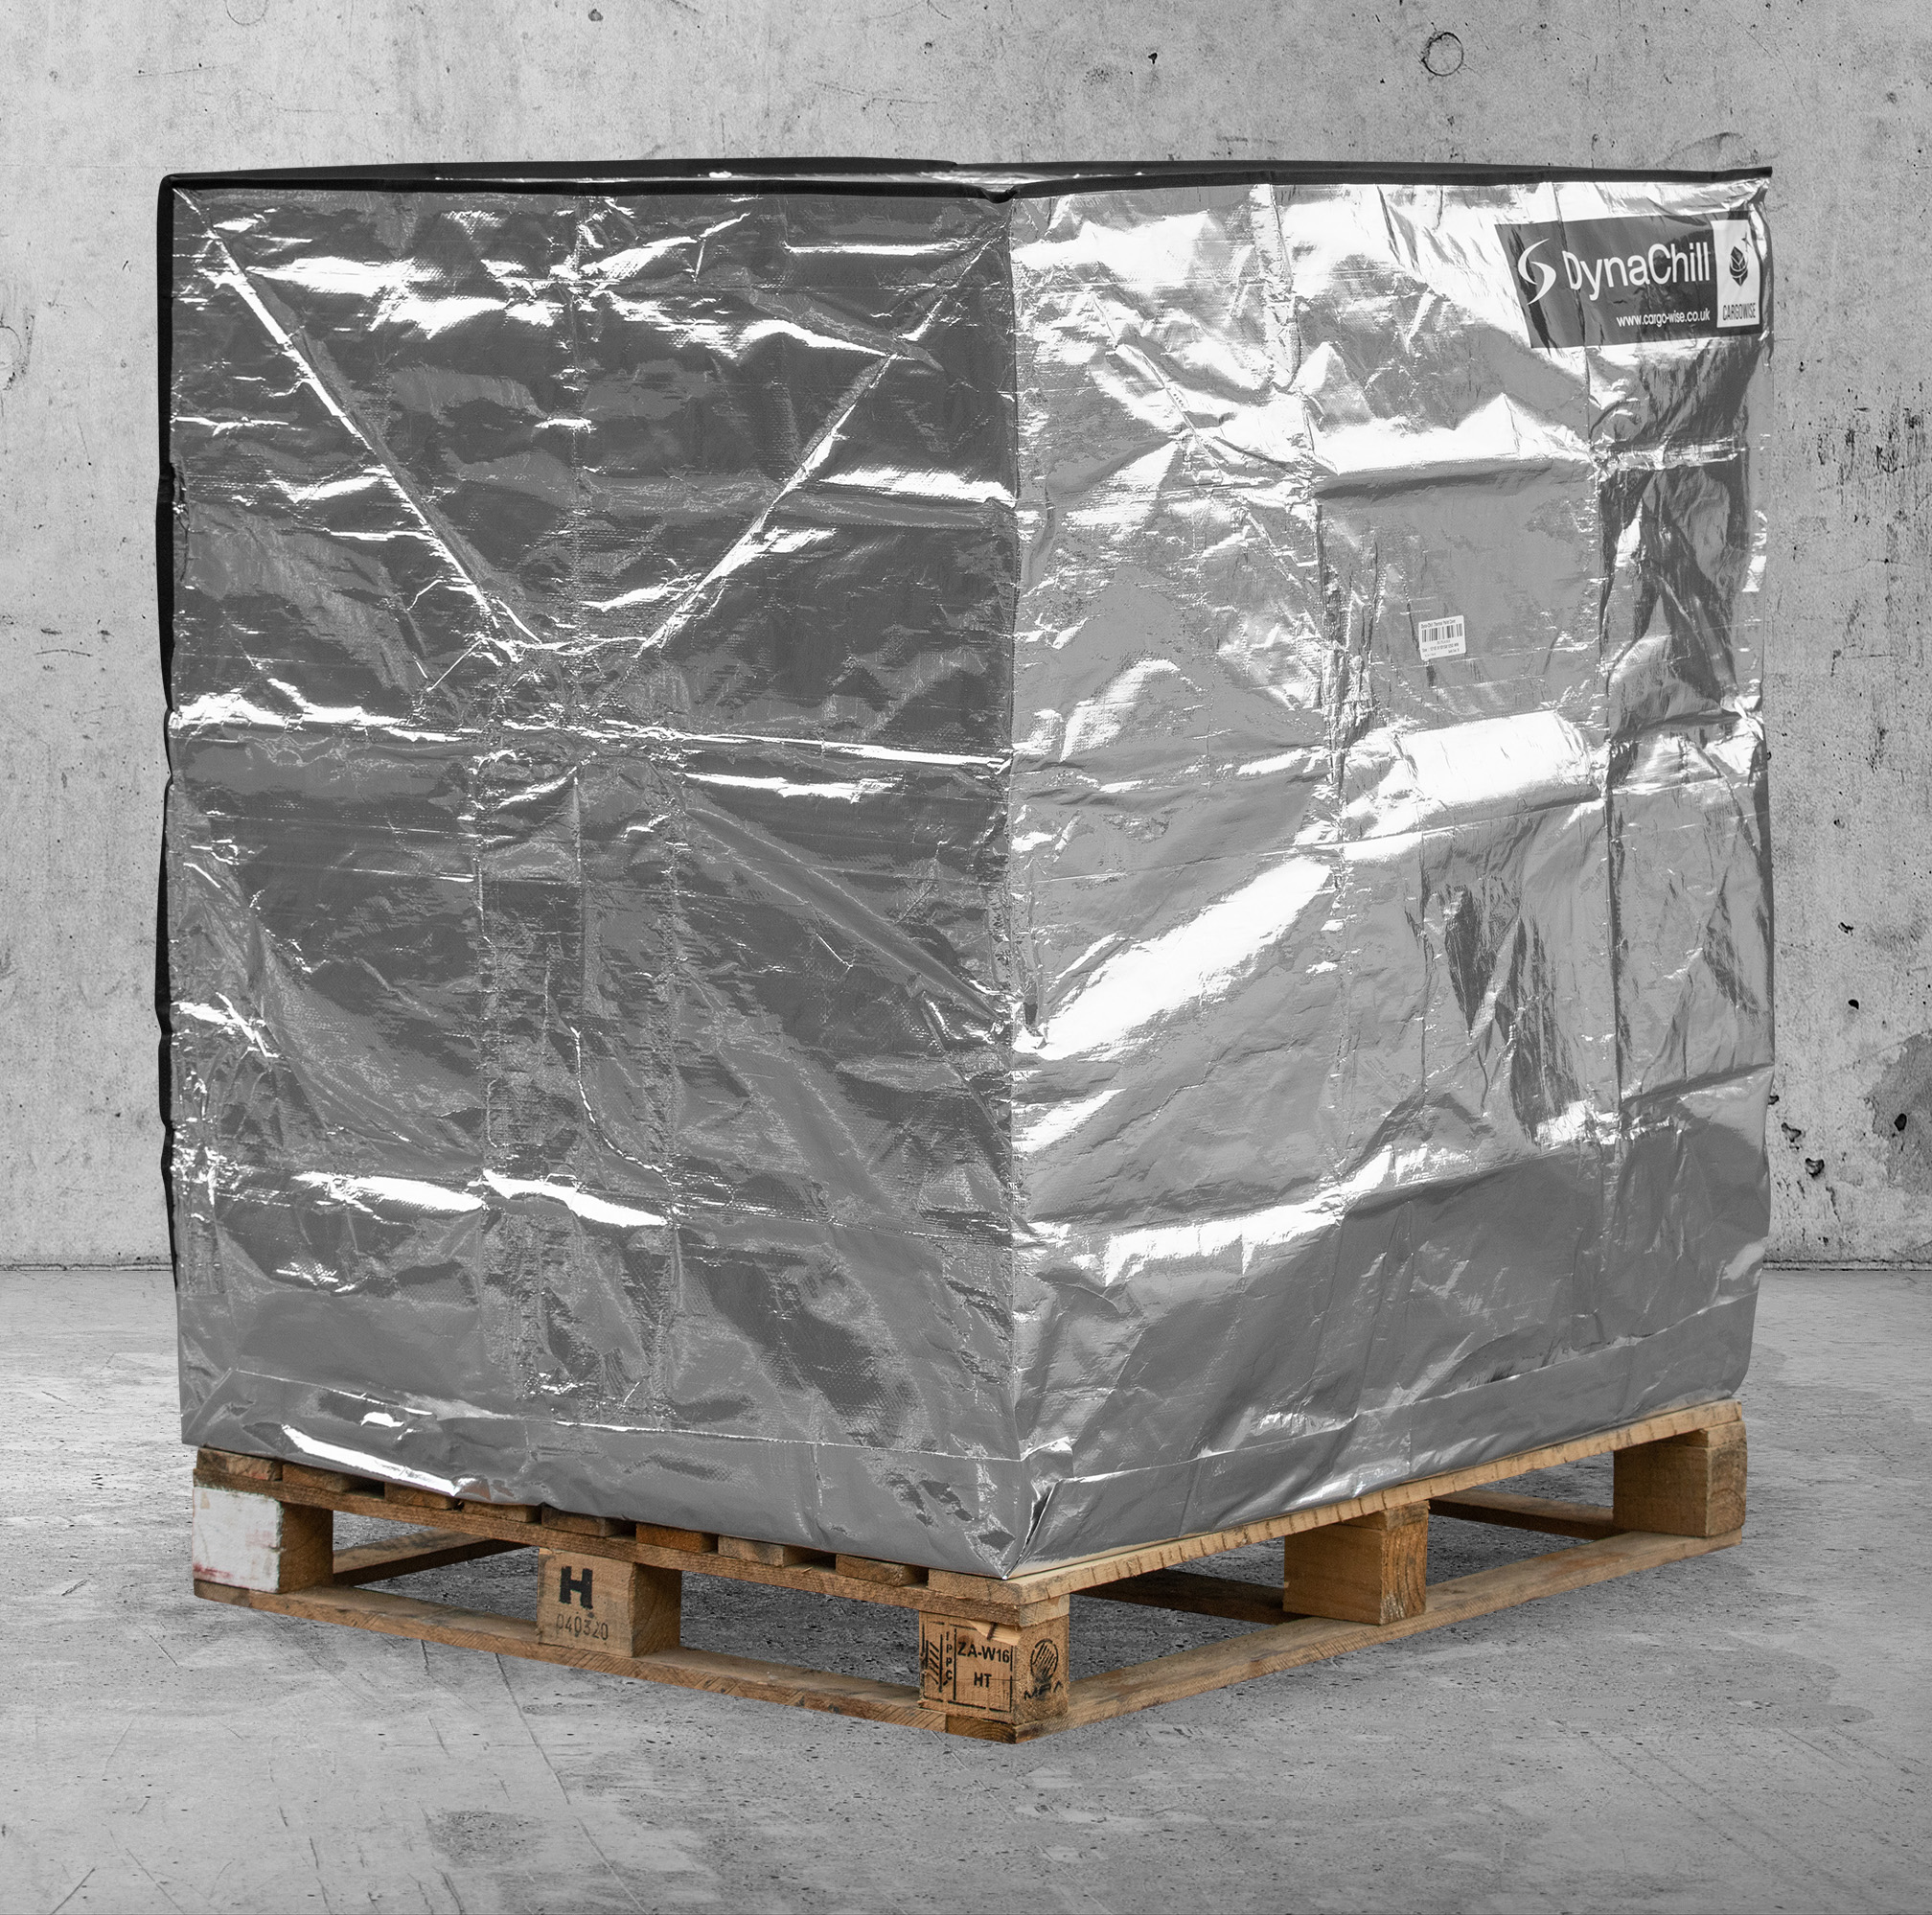 Dynachill thermal foil cover on a pallet in a concrete environment